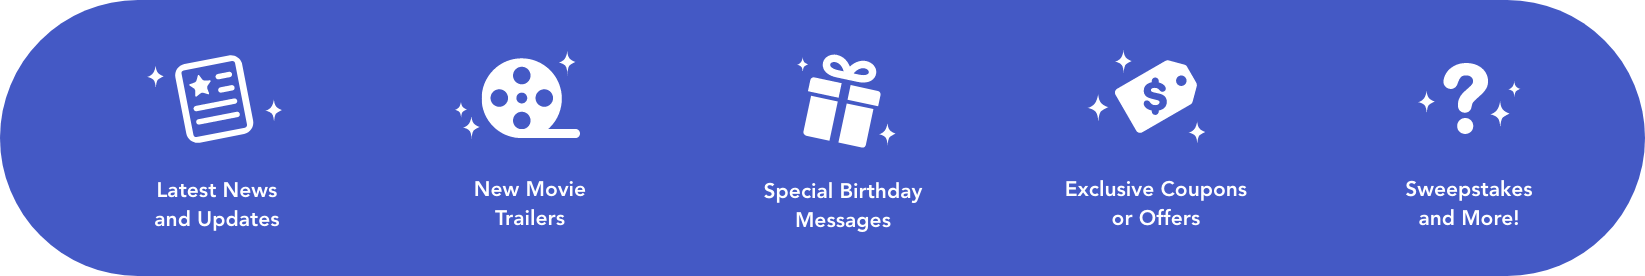 Latest News and Updates, New Movie Trailers, Special Birthday Messages, Exclusive Coupons or Offers, Sweepstakes, and more!